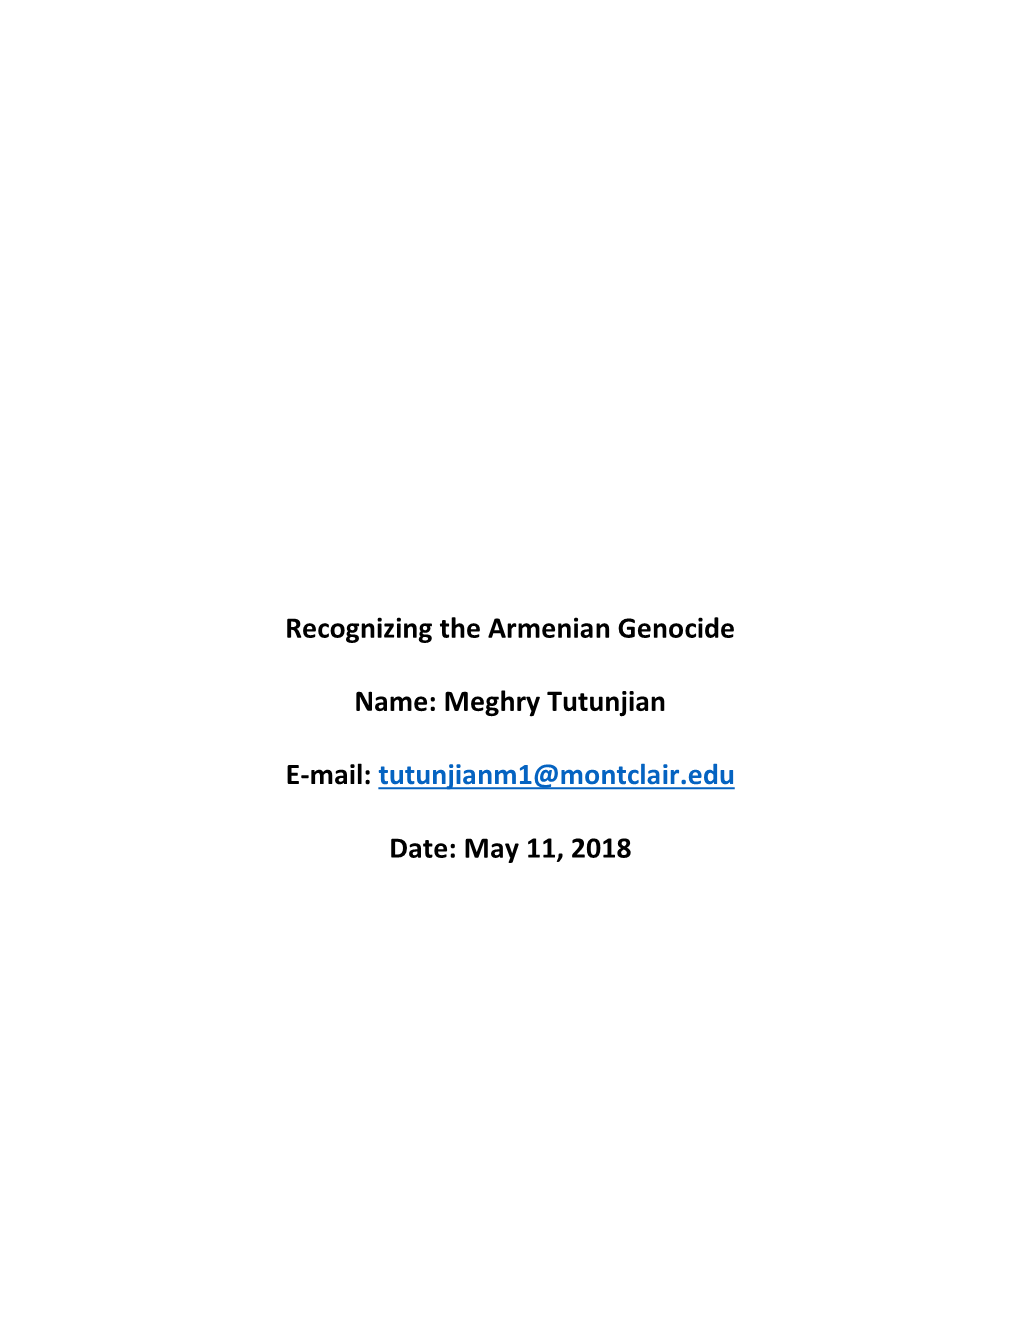 Recognizing the Armenian Genocide Name: Meghry Tutunjian E-Mail